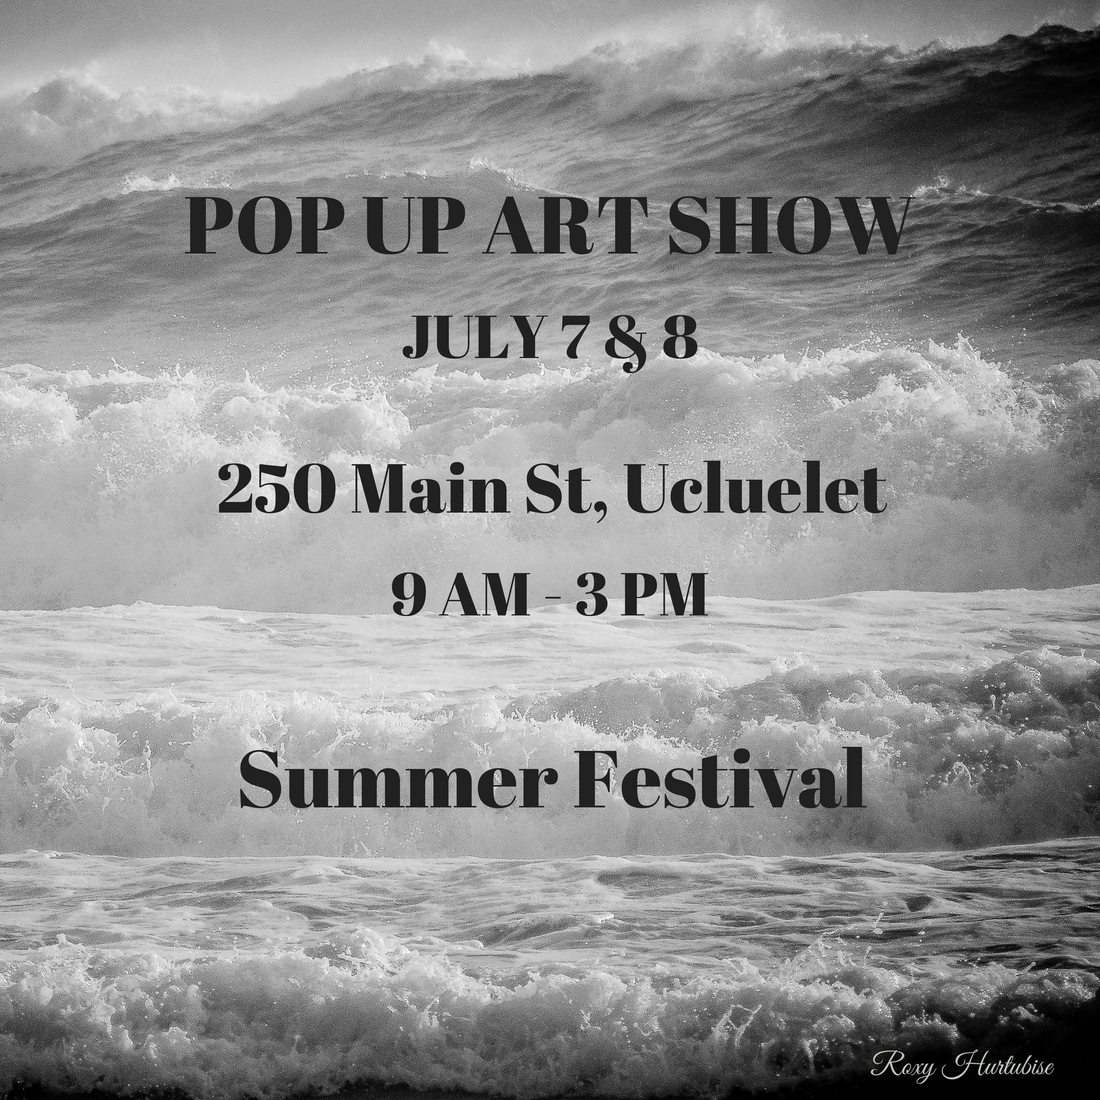 Join me at the Pop Up Art Show Ucluelet July 7&8